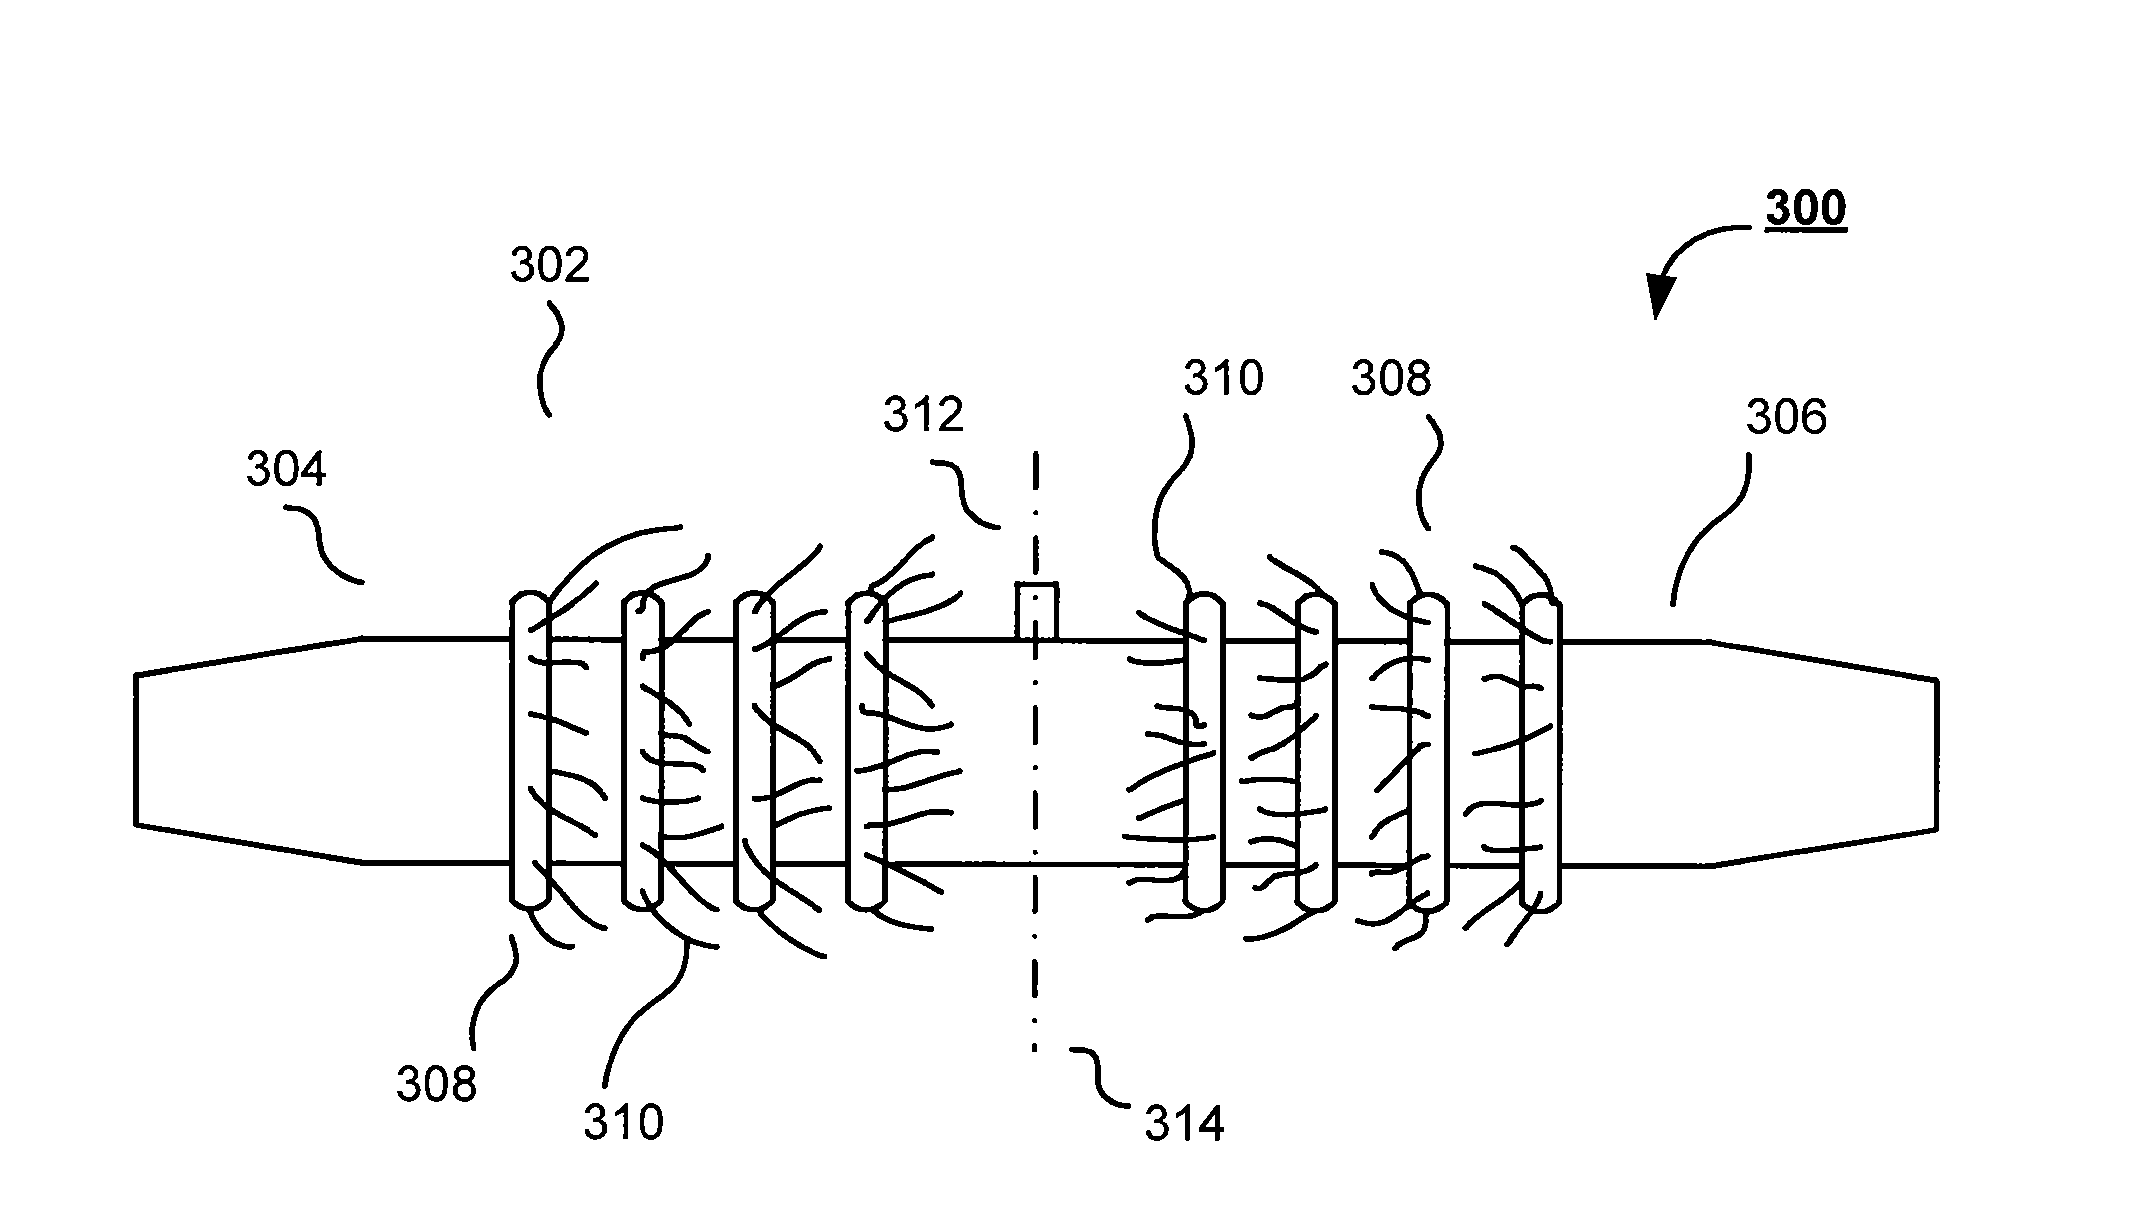 Connector for insulating glazing units with multiple barriers for moisture vapor and gas